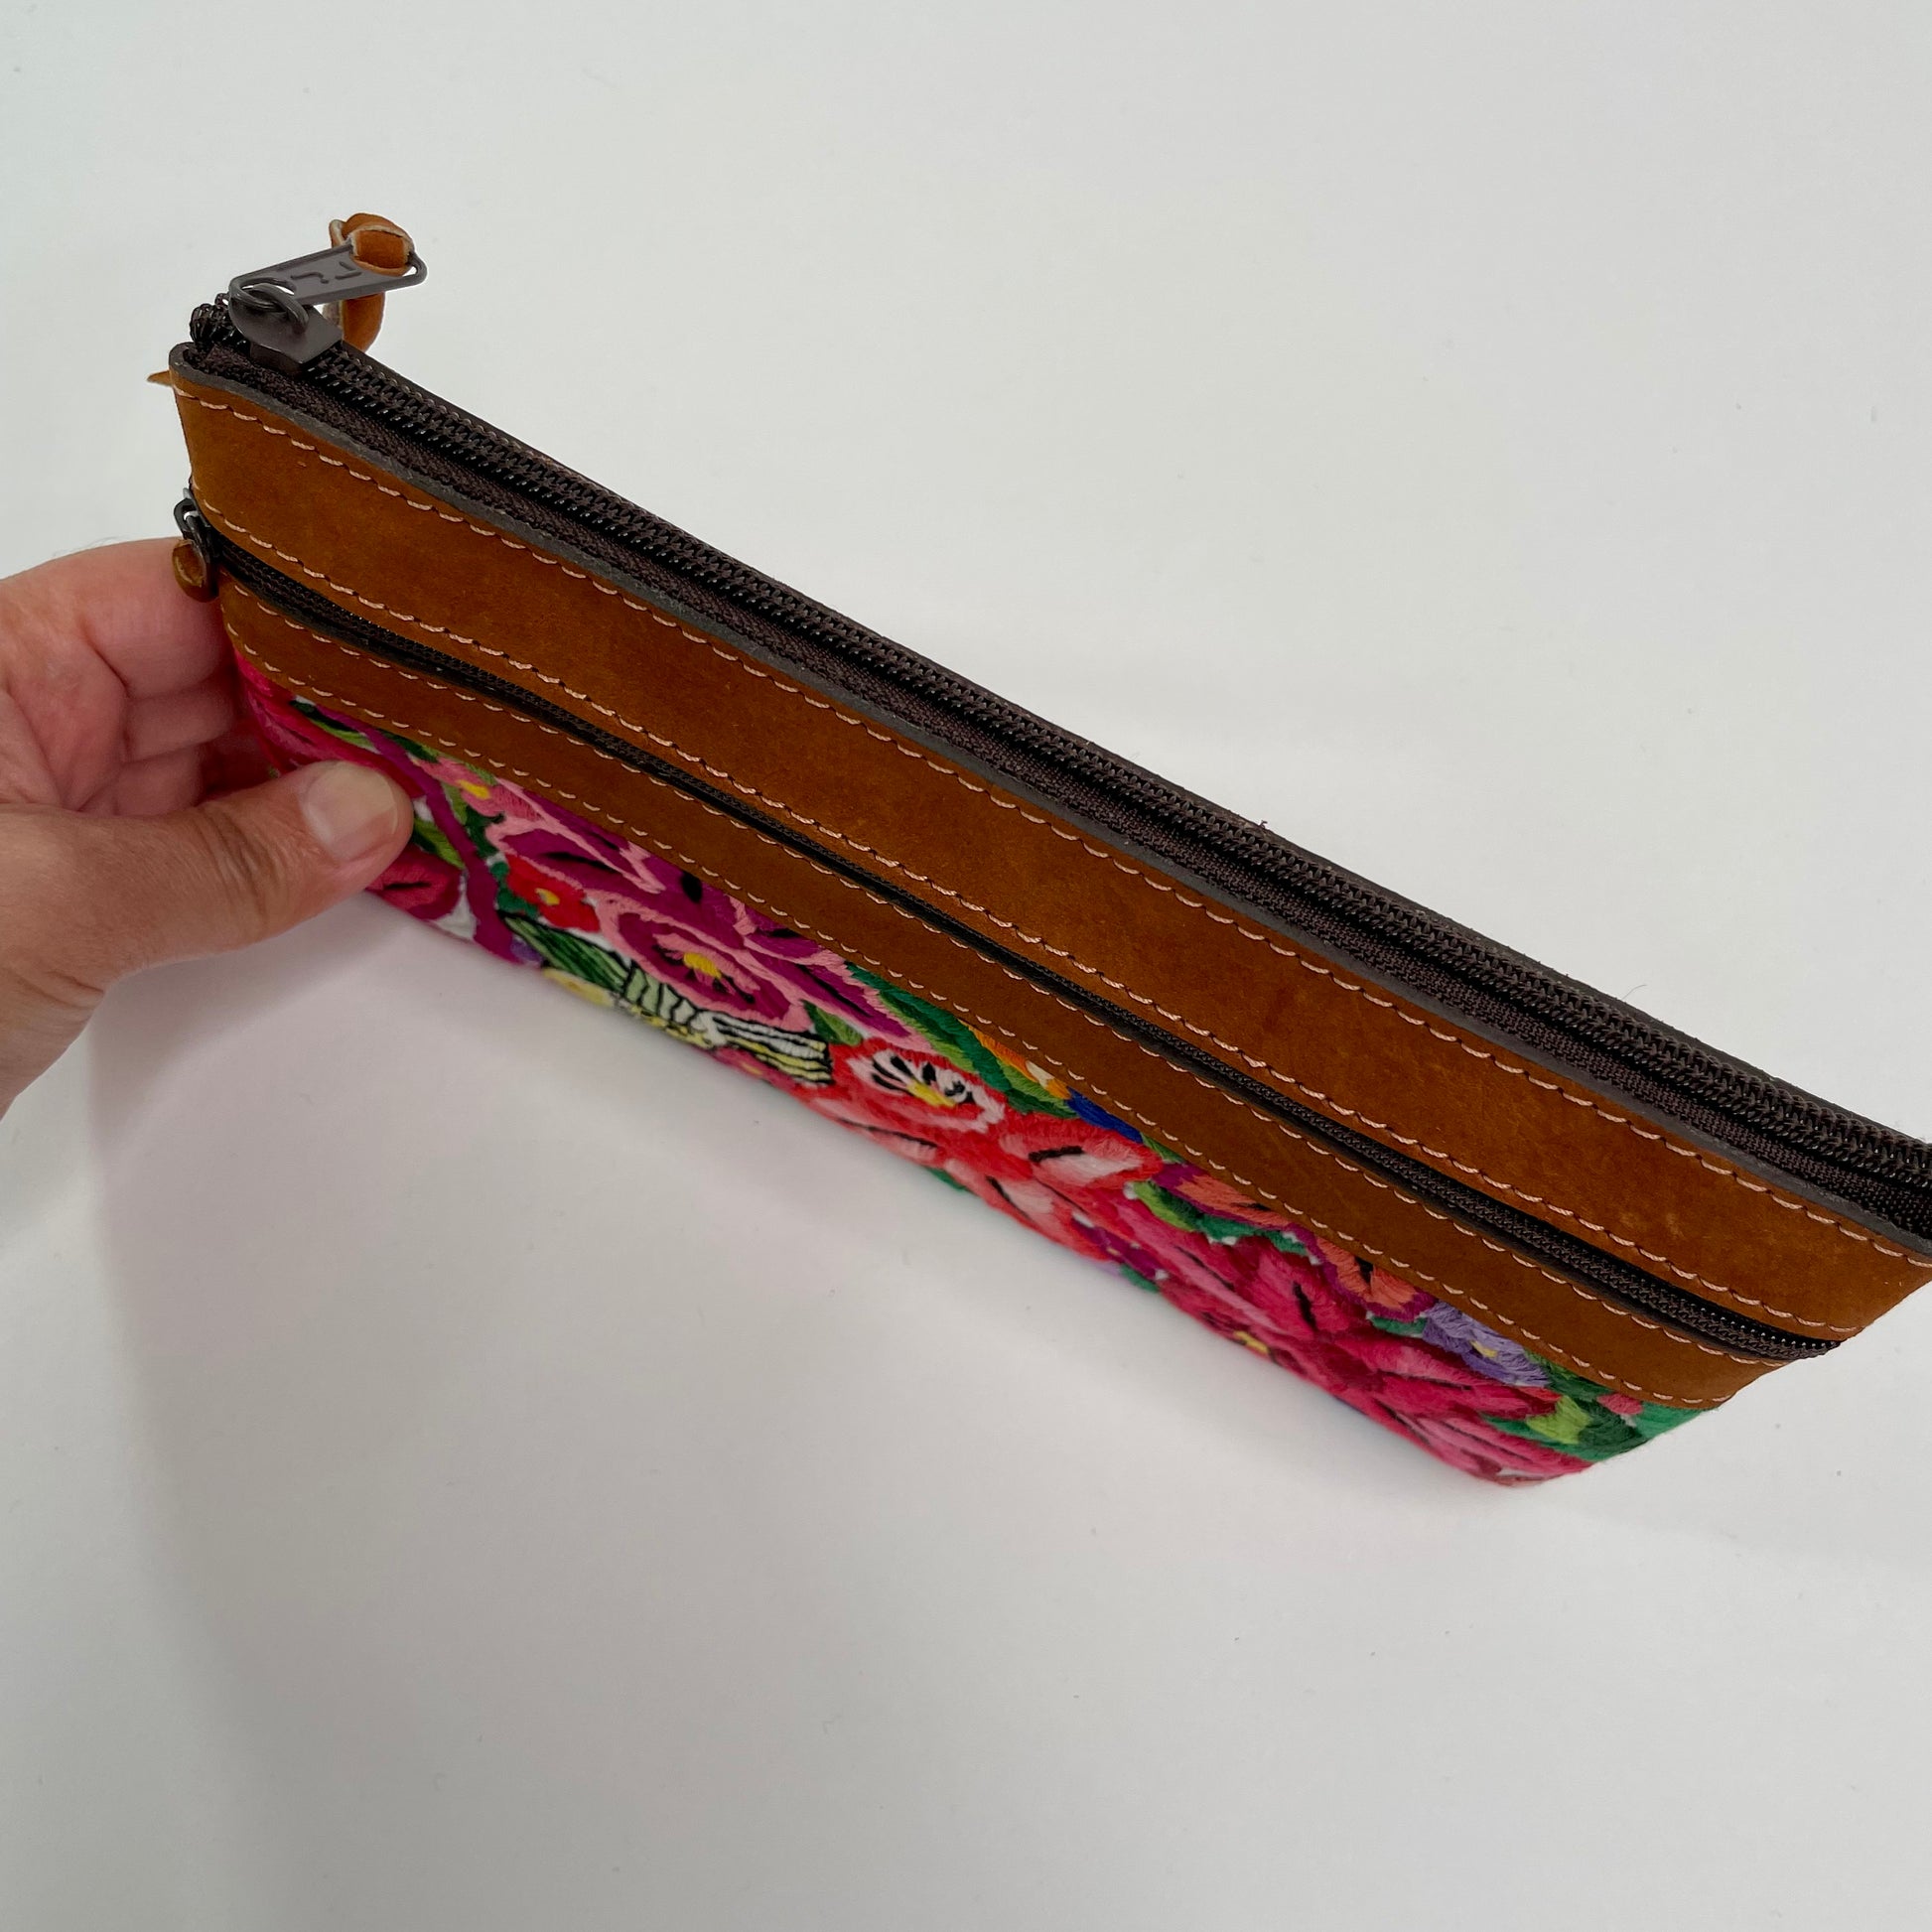 Cosmetic pouch is created with repurposed Mayan blouse material and Nubuck leather.